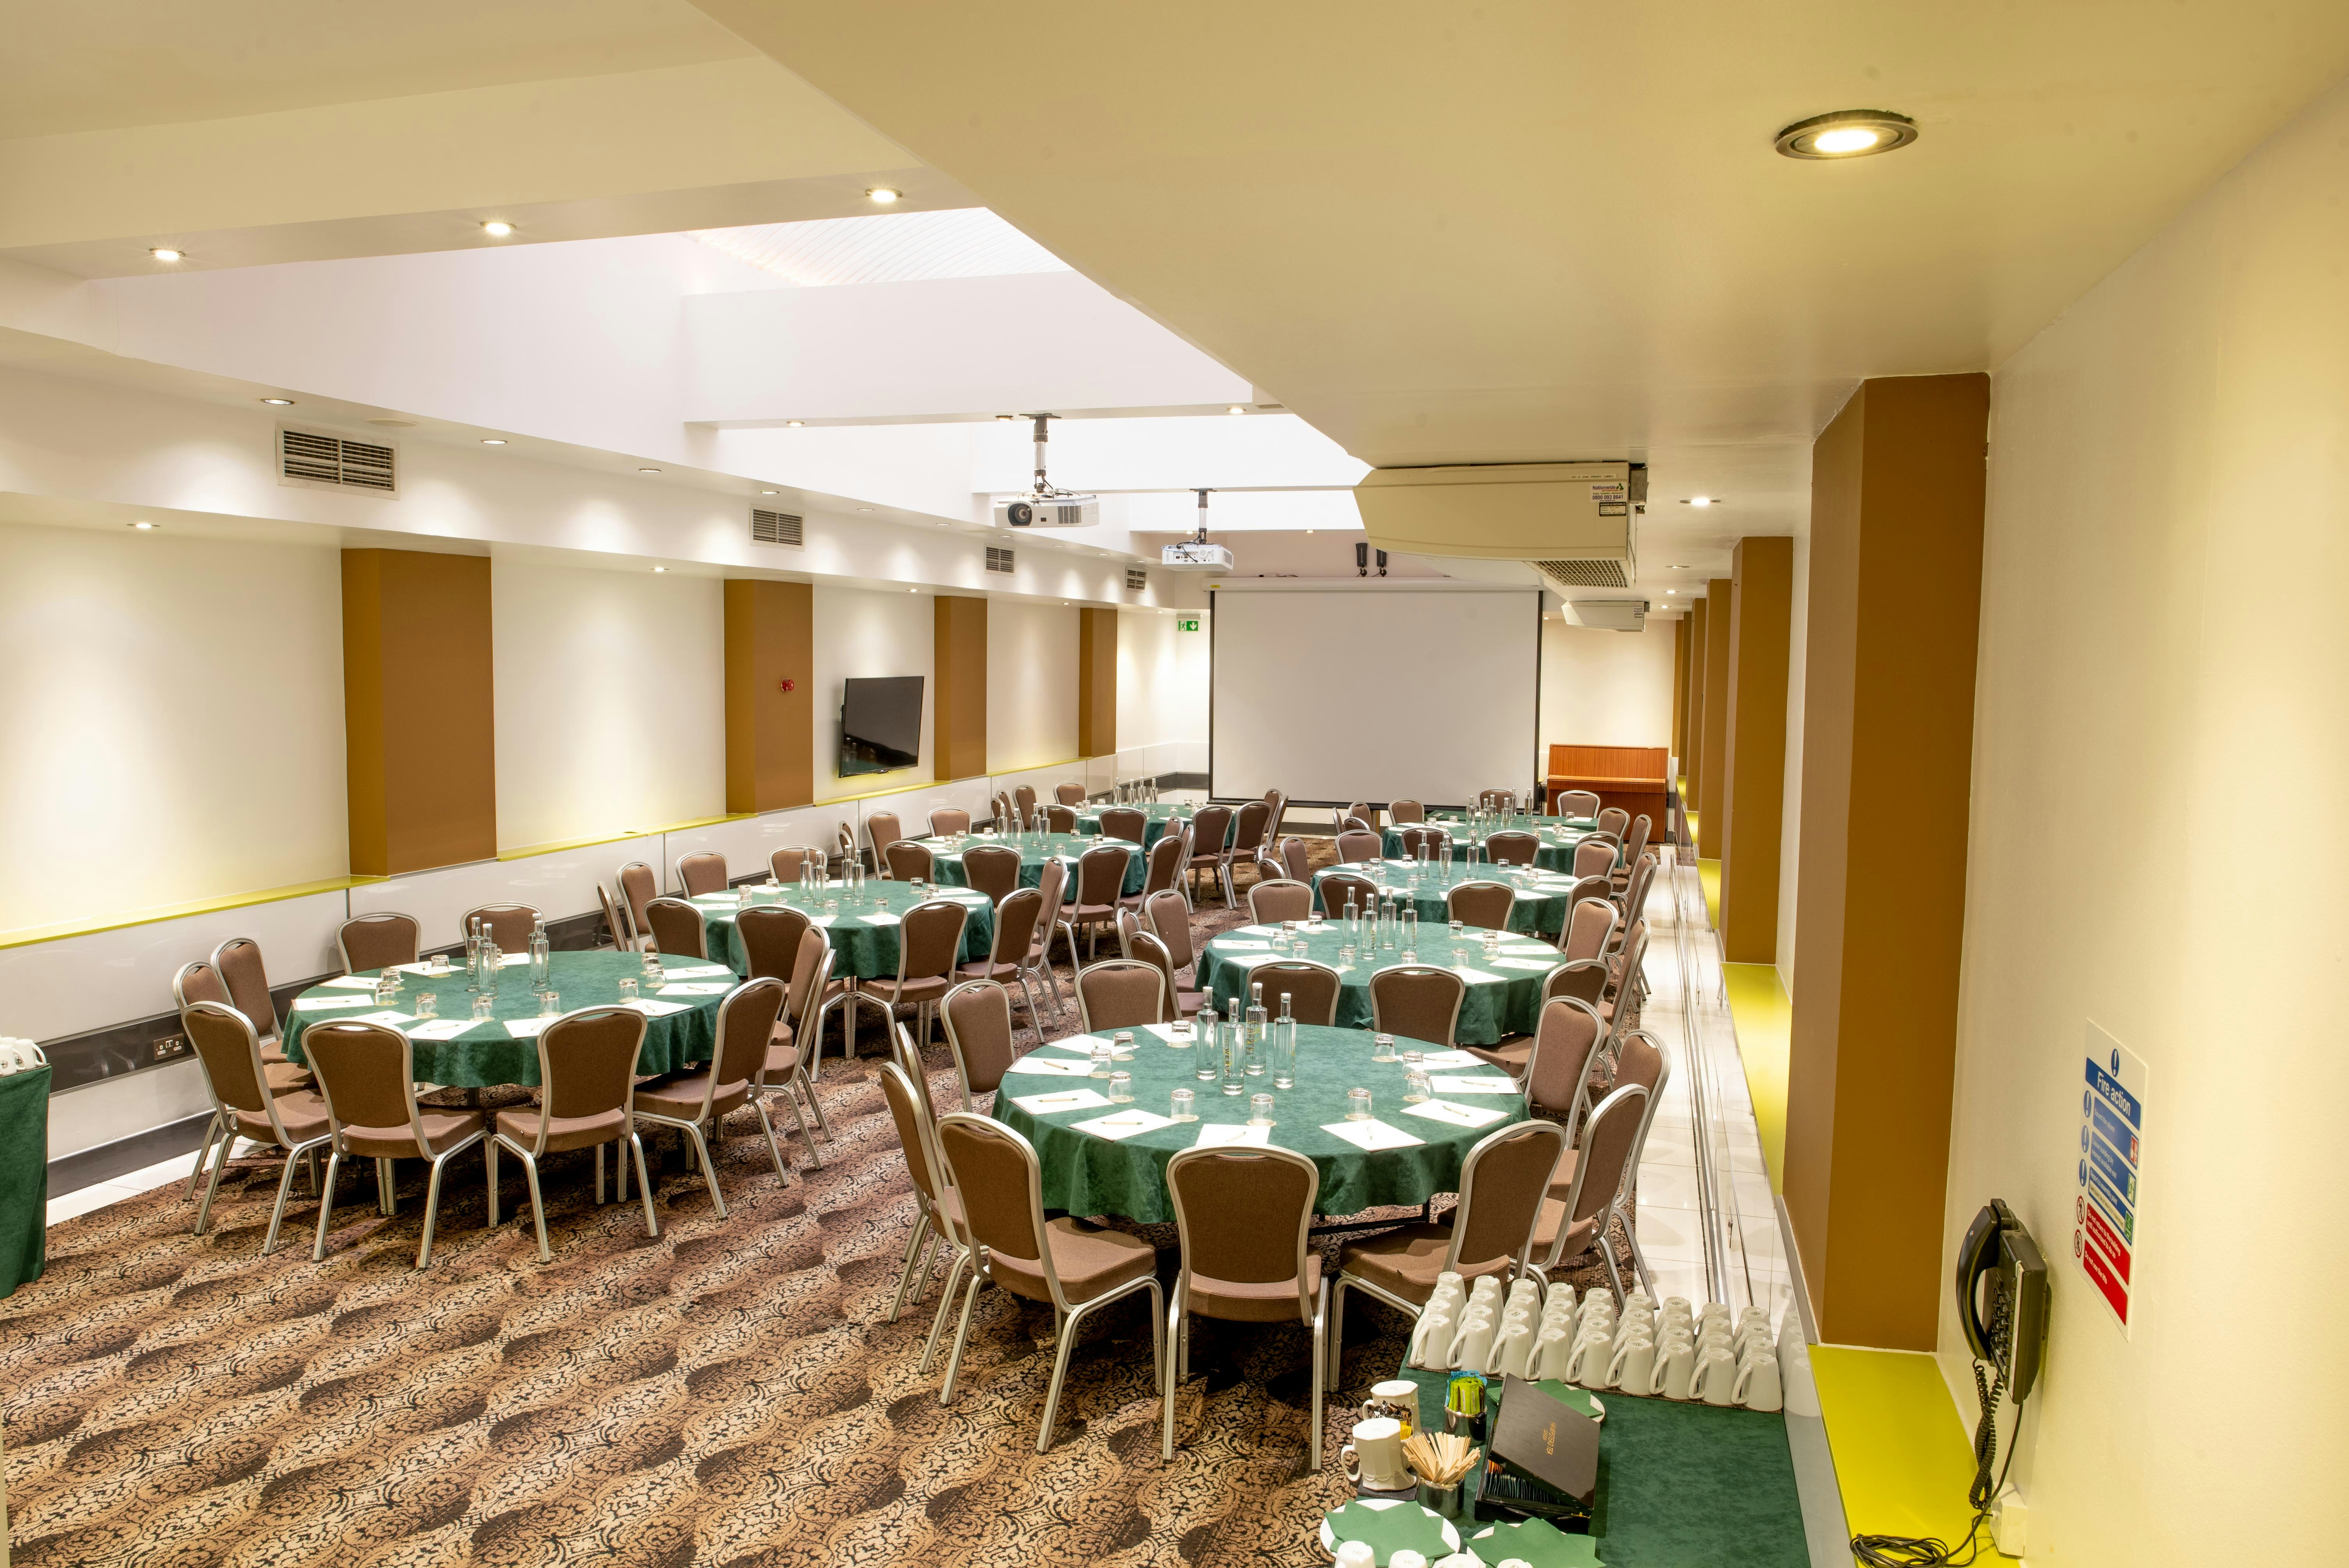 The Wesley Euston Hotel & Conference Venue  - Porter Hall image 1